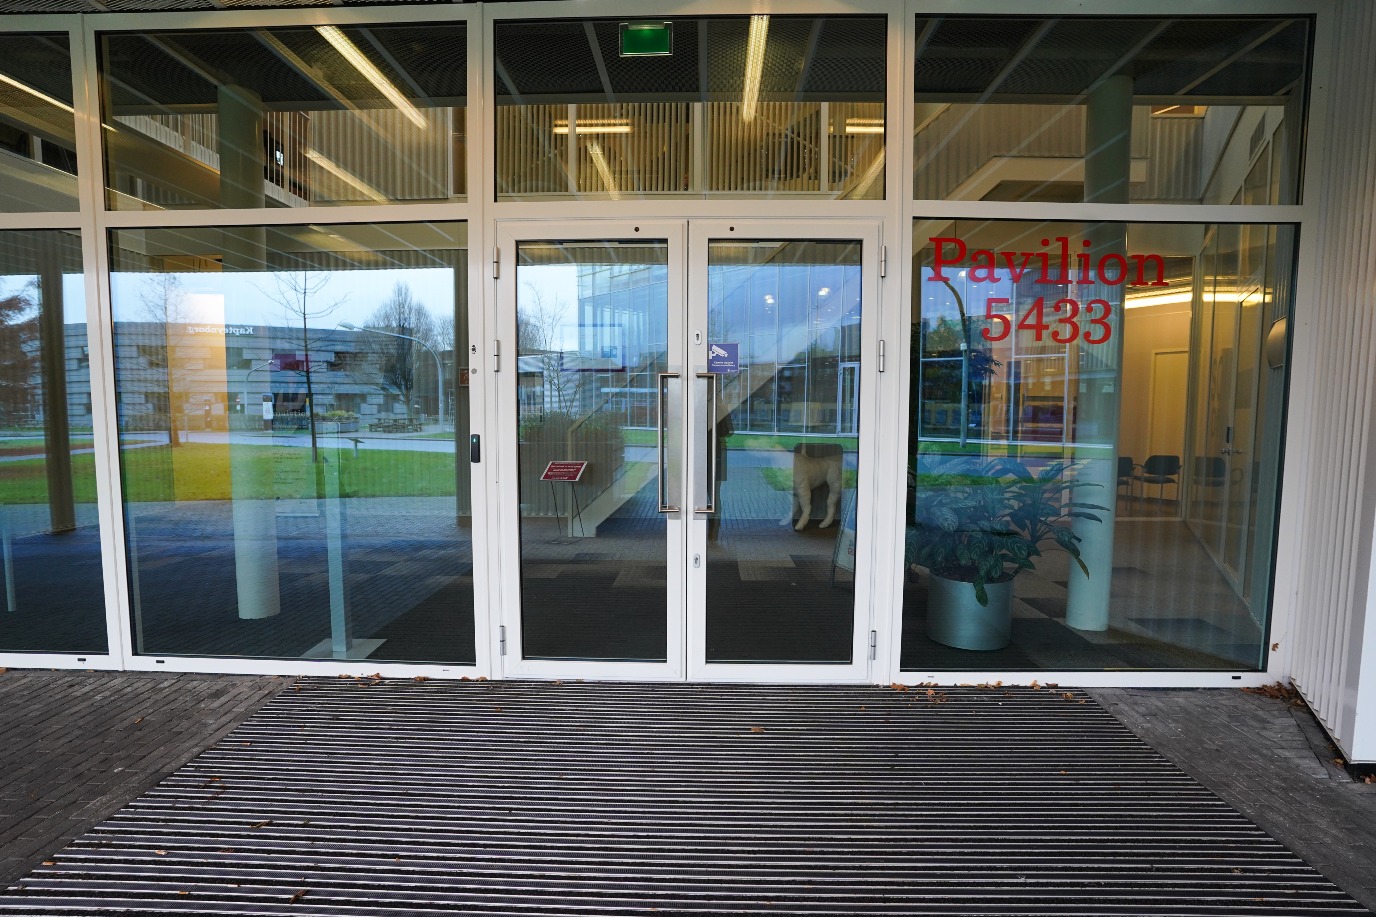 Main entrance with automatic sliding doors